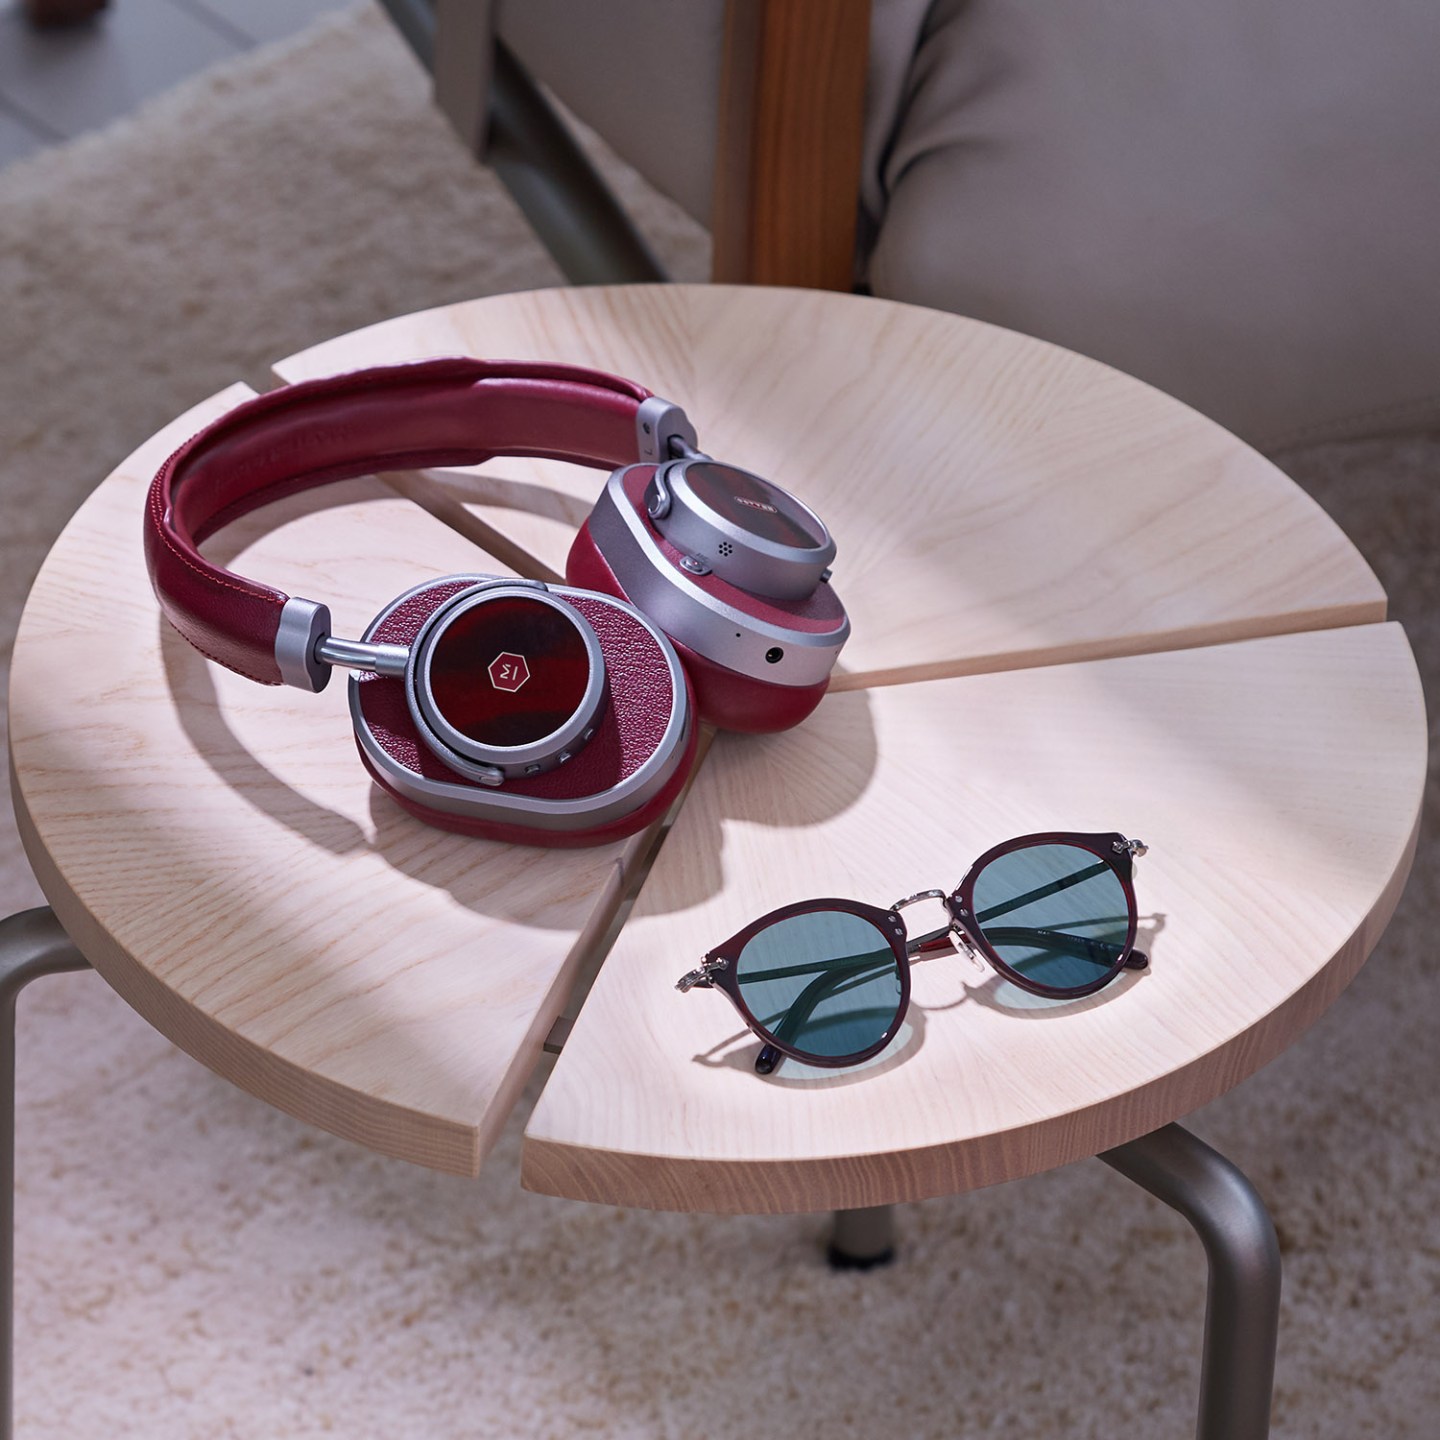 The collection is available in three limited-edition colors, including Bordeaux Acetate